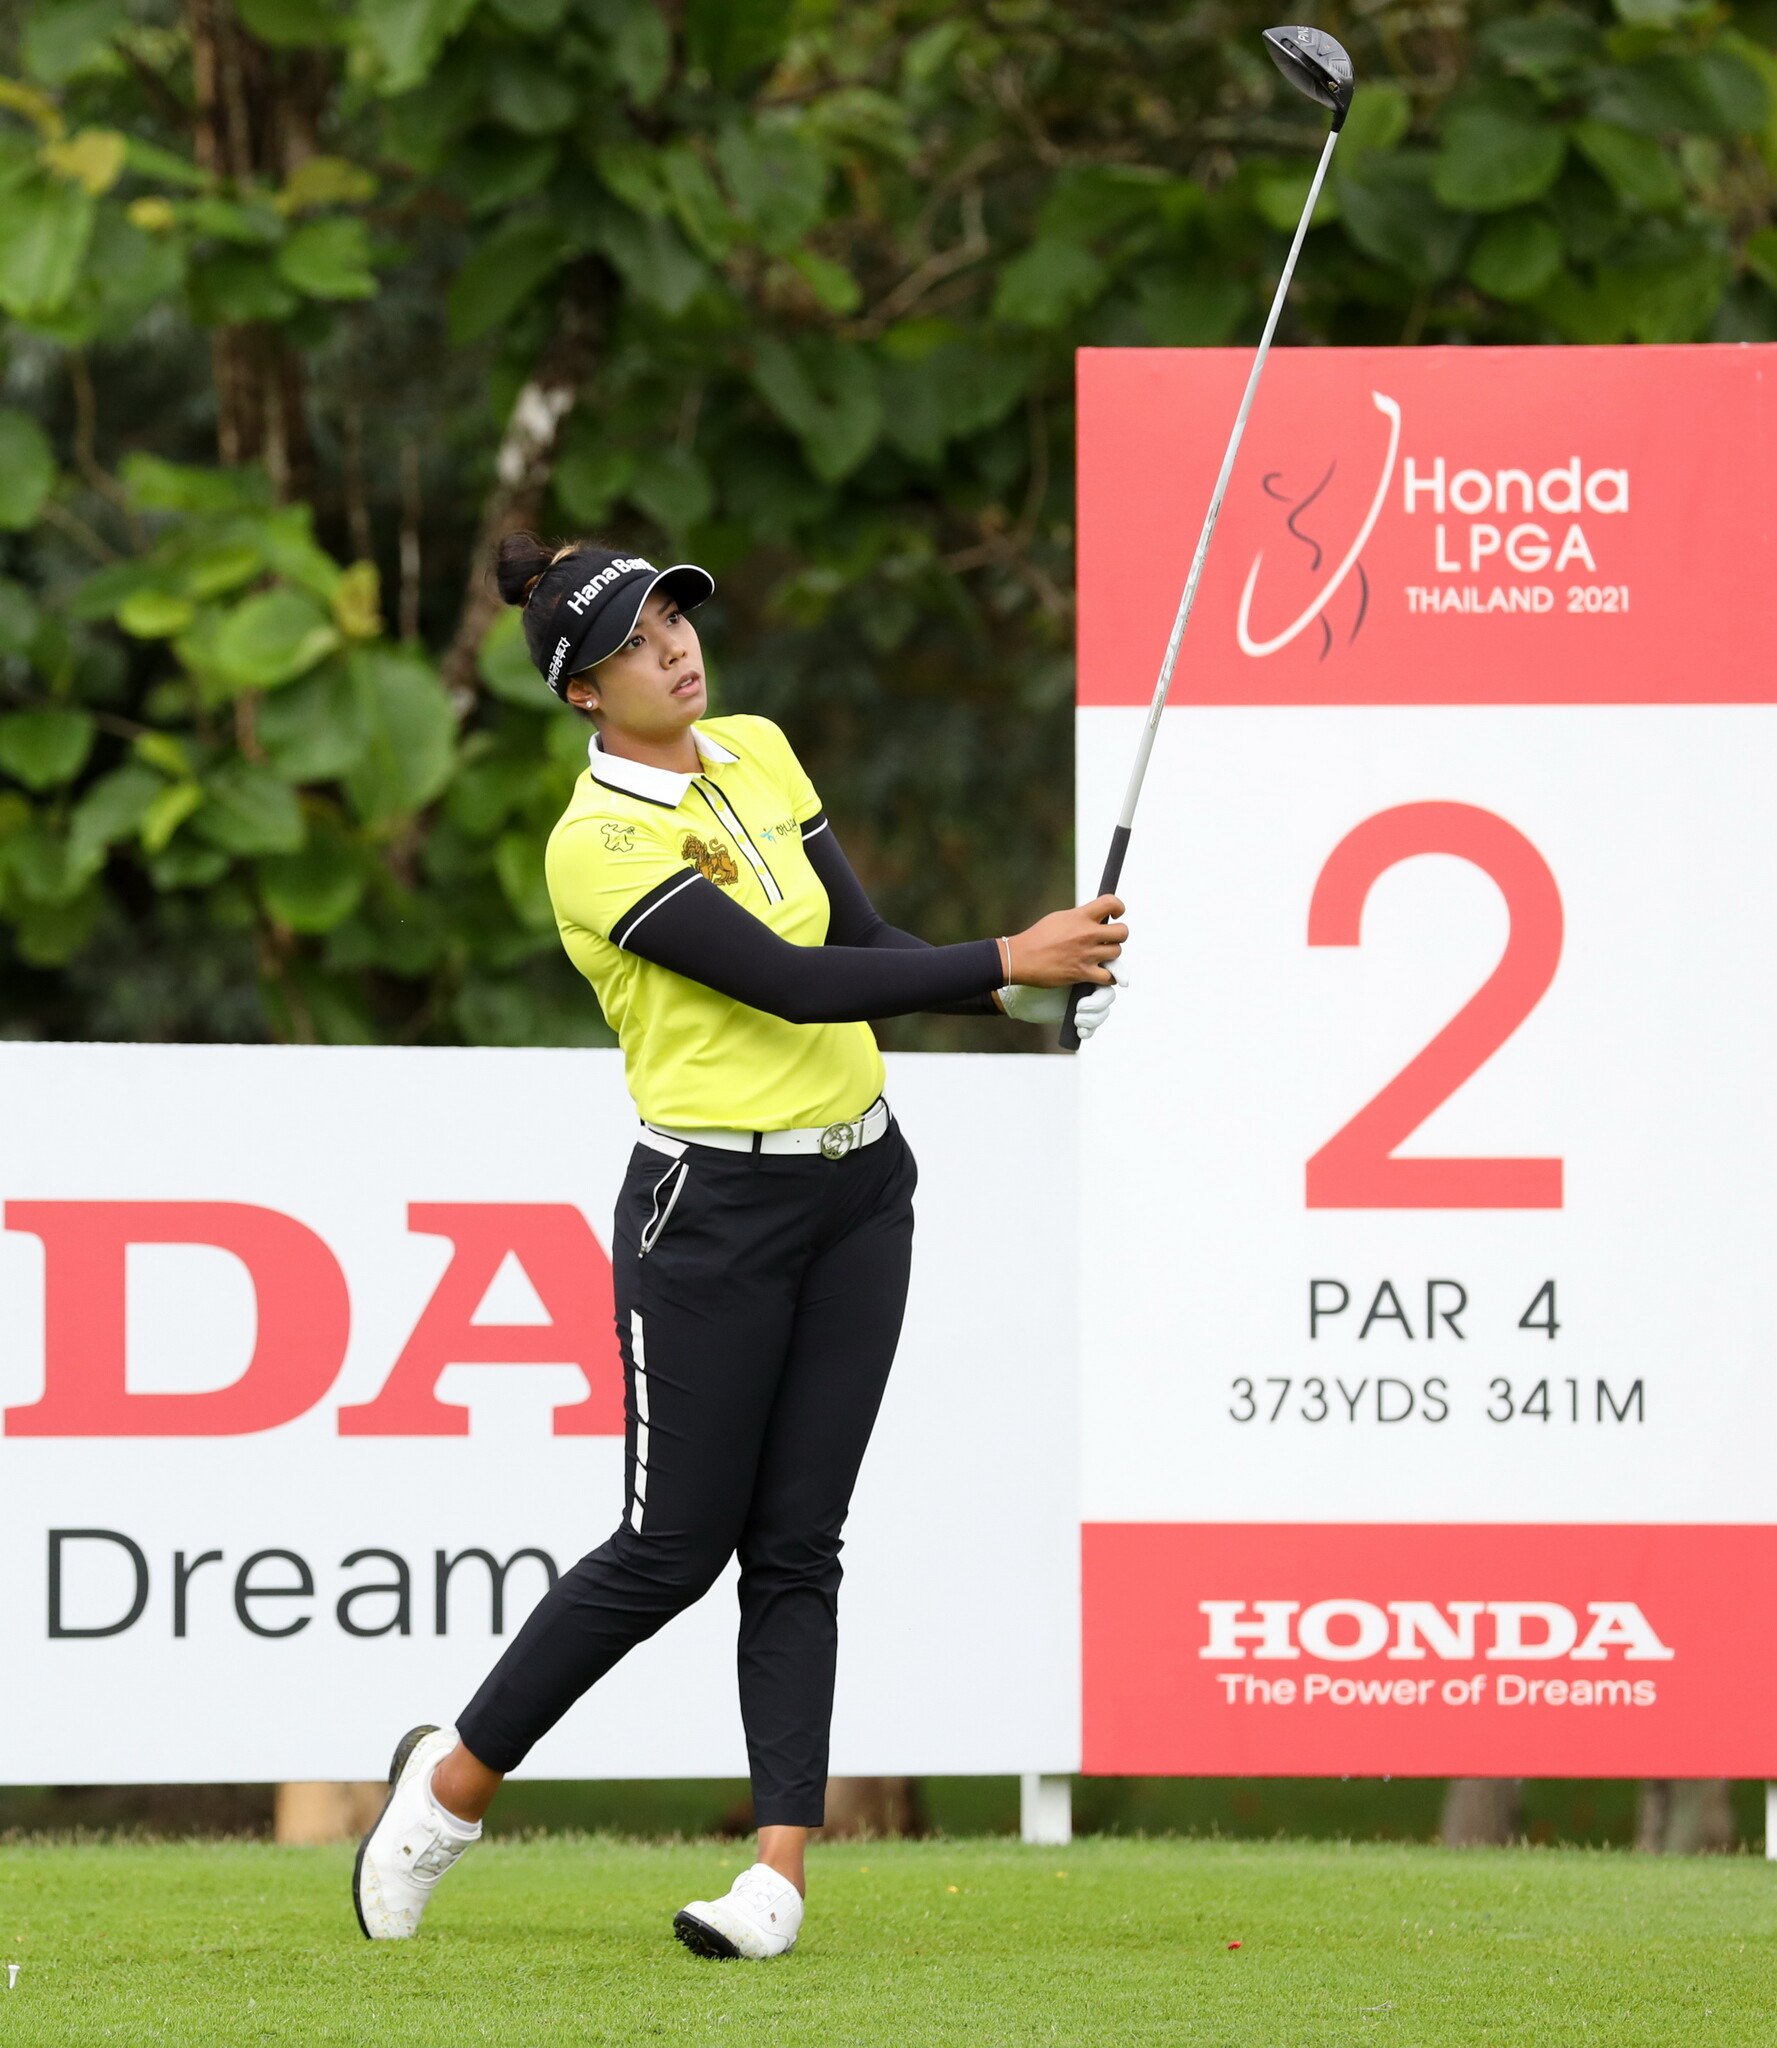 Atthaya, Patty share one-stroke lead after first day at Honda LPGA Thailand 2021